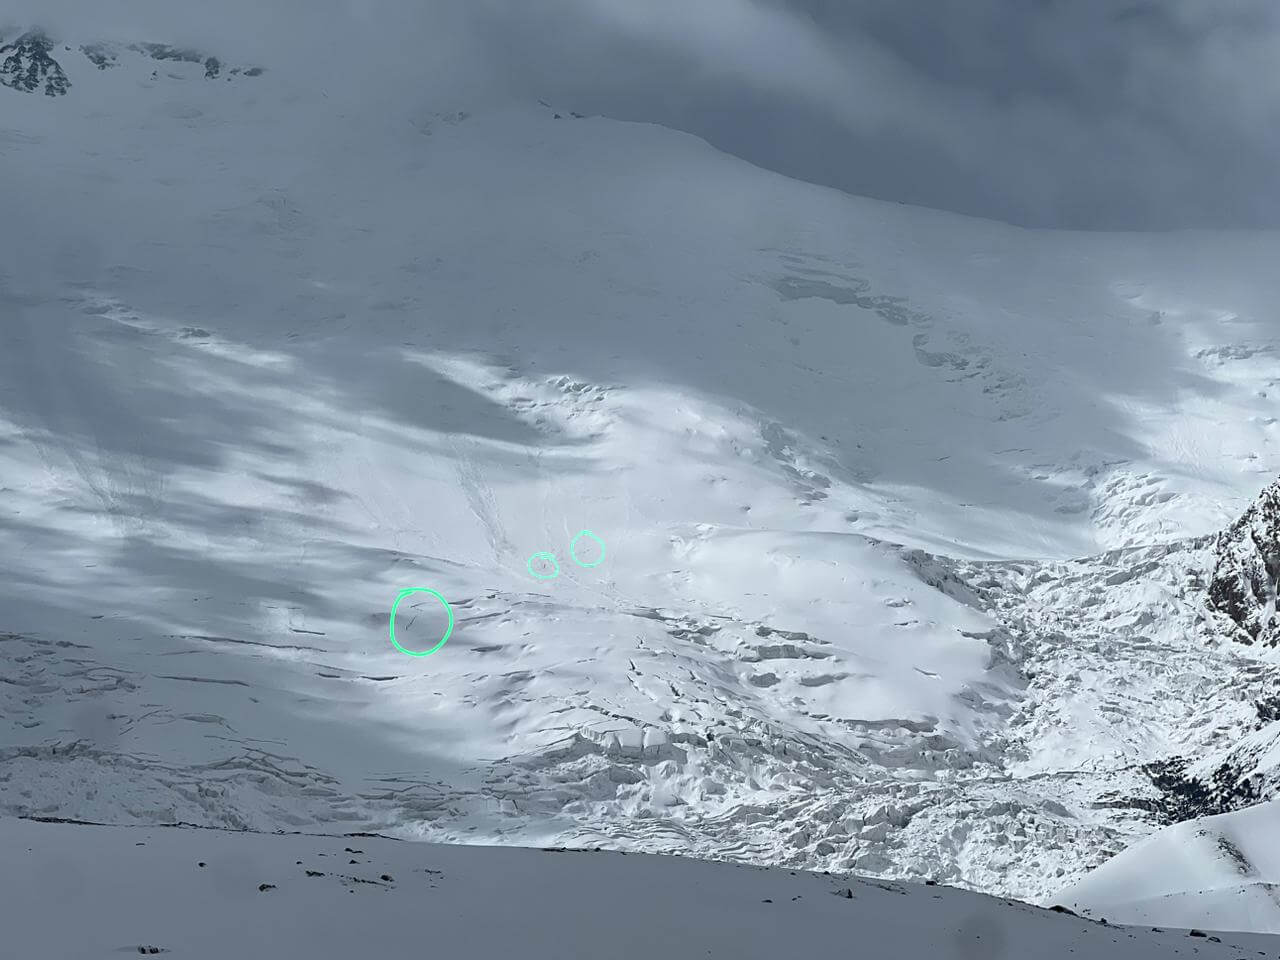 A vast white snowfield with many crevasses, and 3 small circles indicating climbers on the route. 